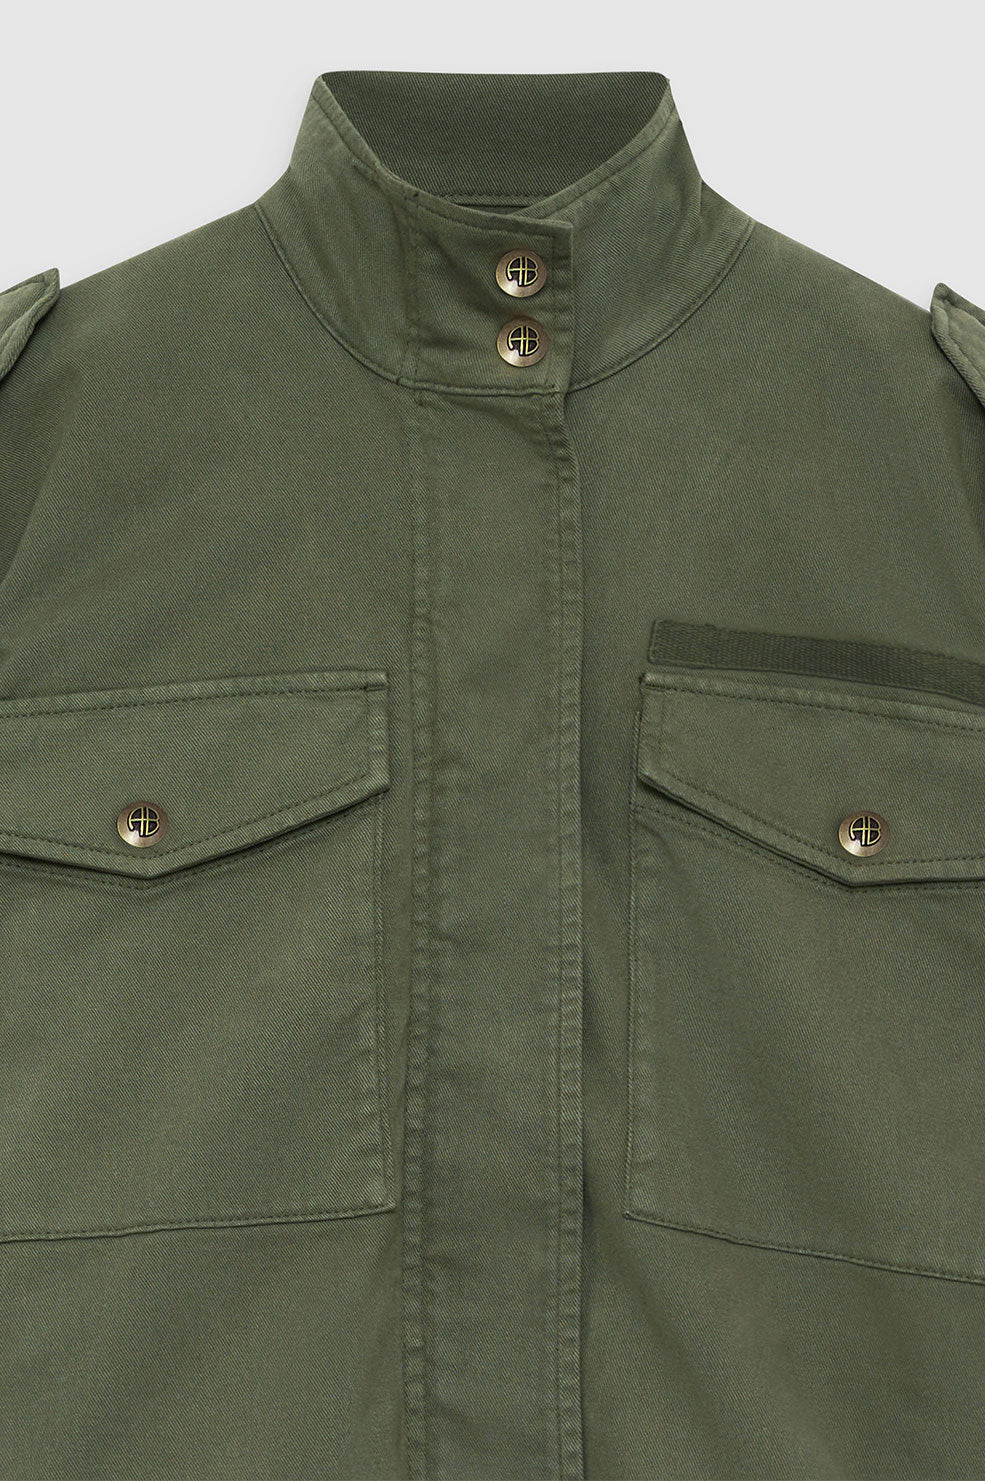 ANINE BING Audrey Jacket - Army Green - Detail View